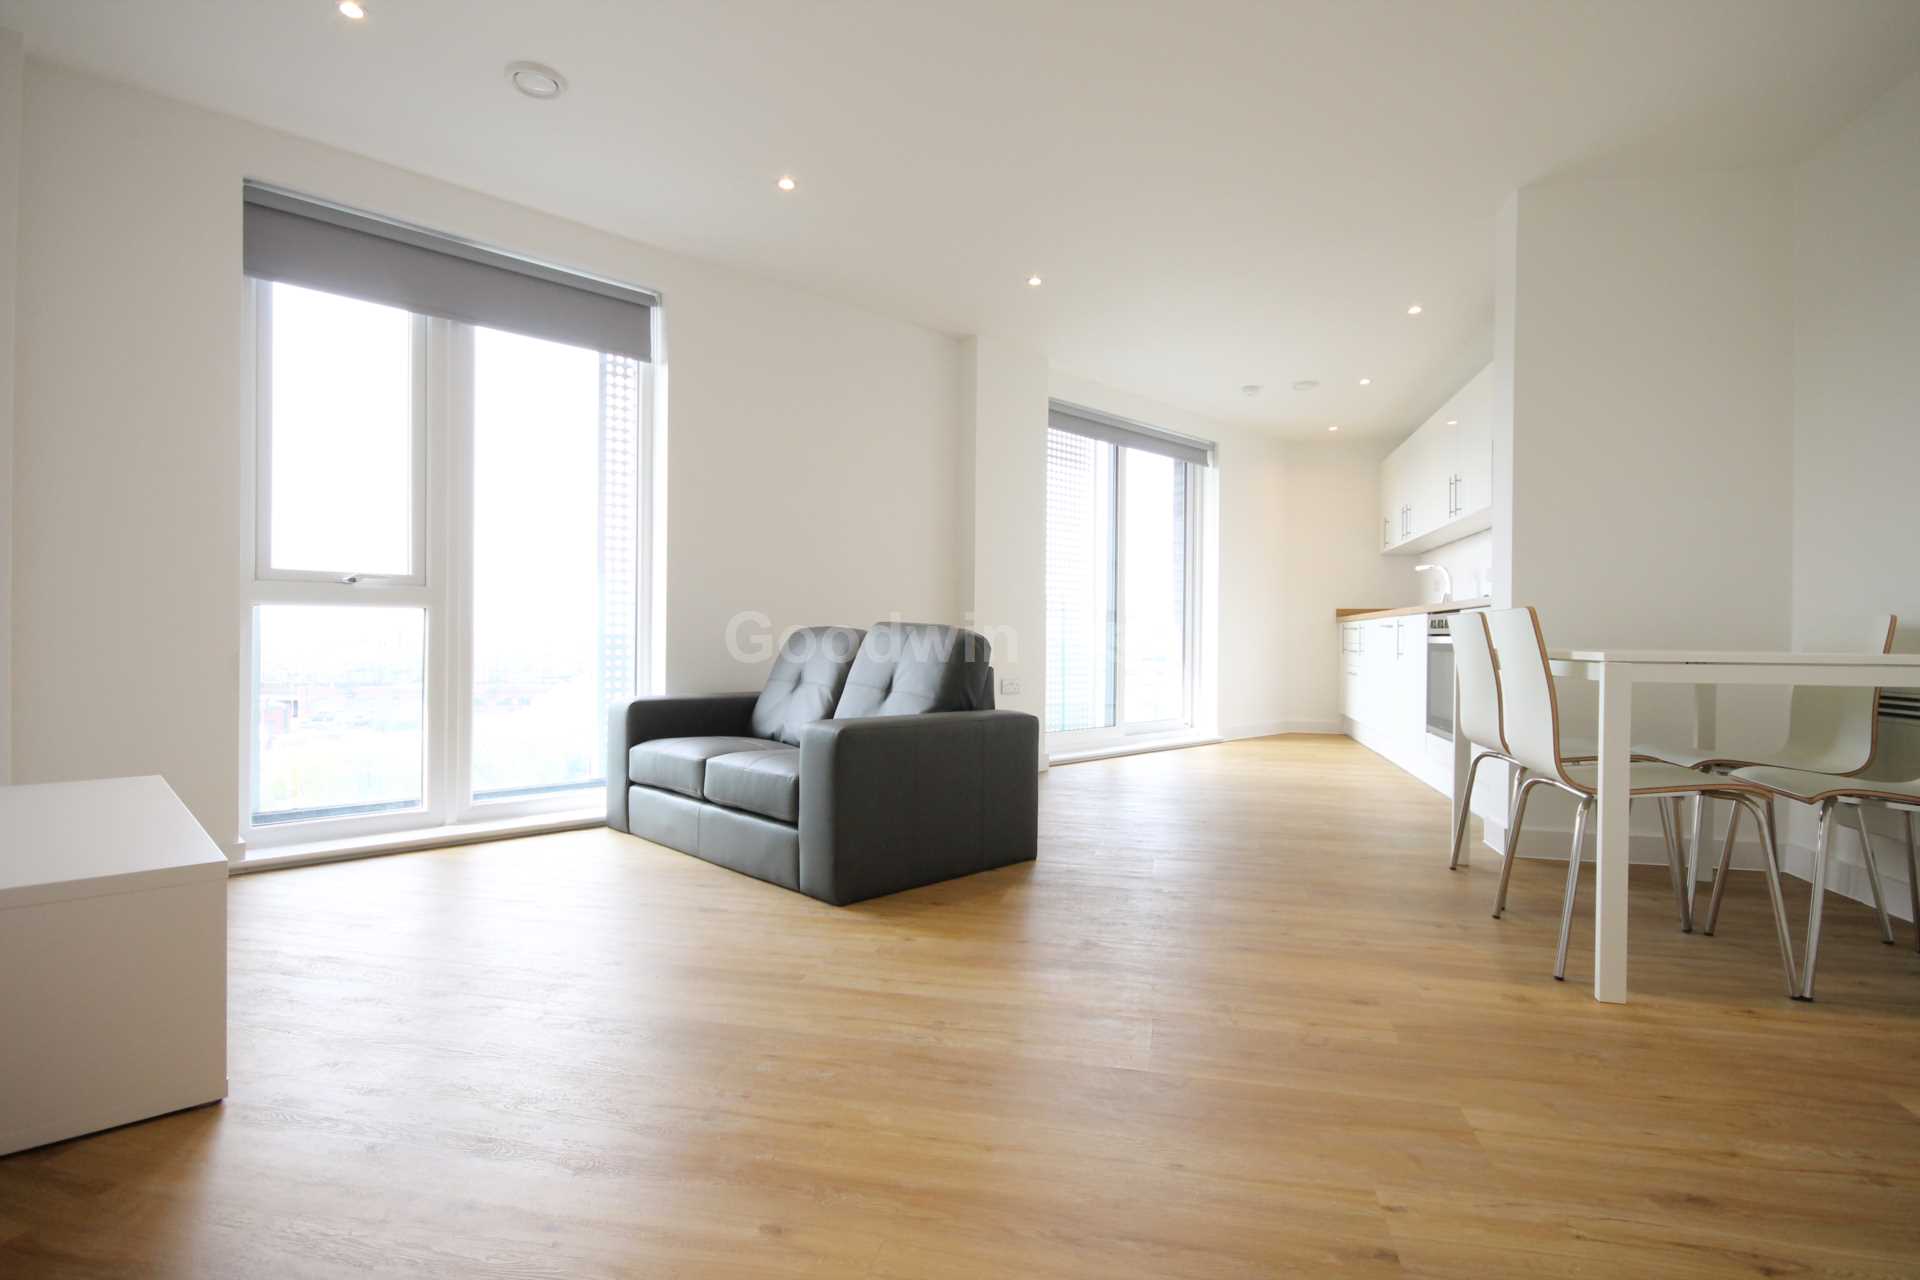 3 bed Apartment for rent in Manchester. From Goodwin Fish & Co - Manchester